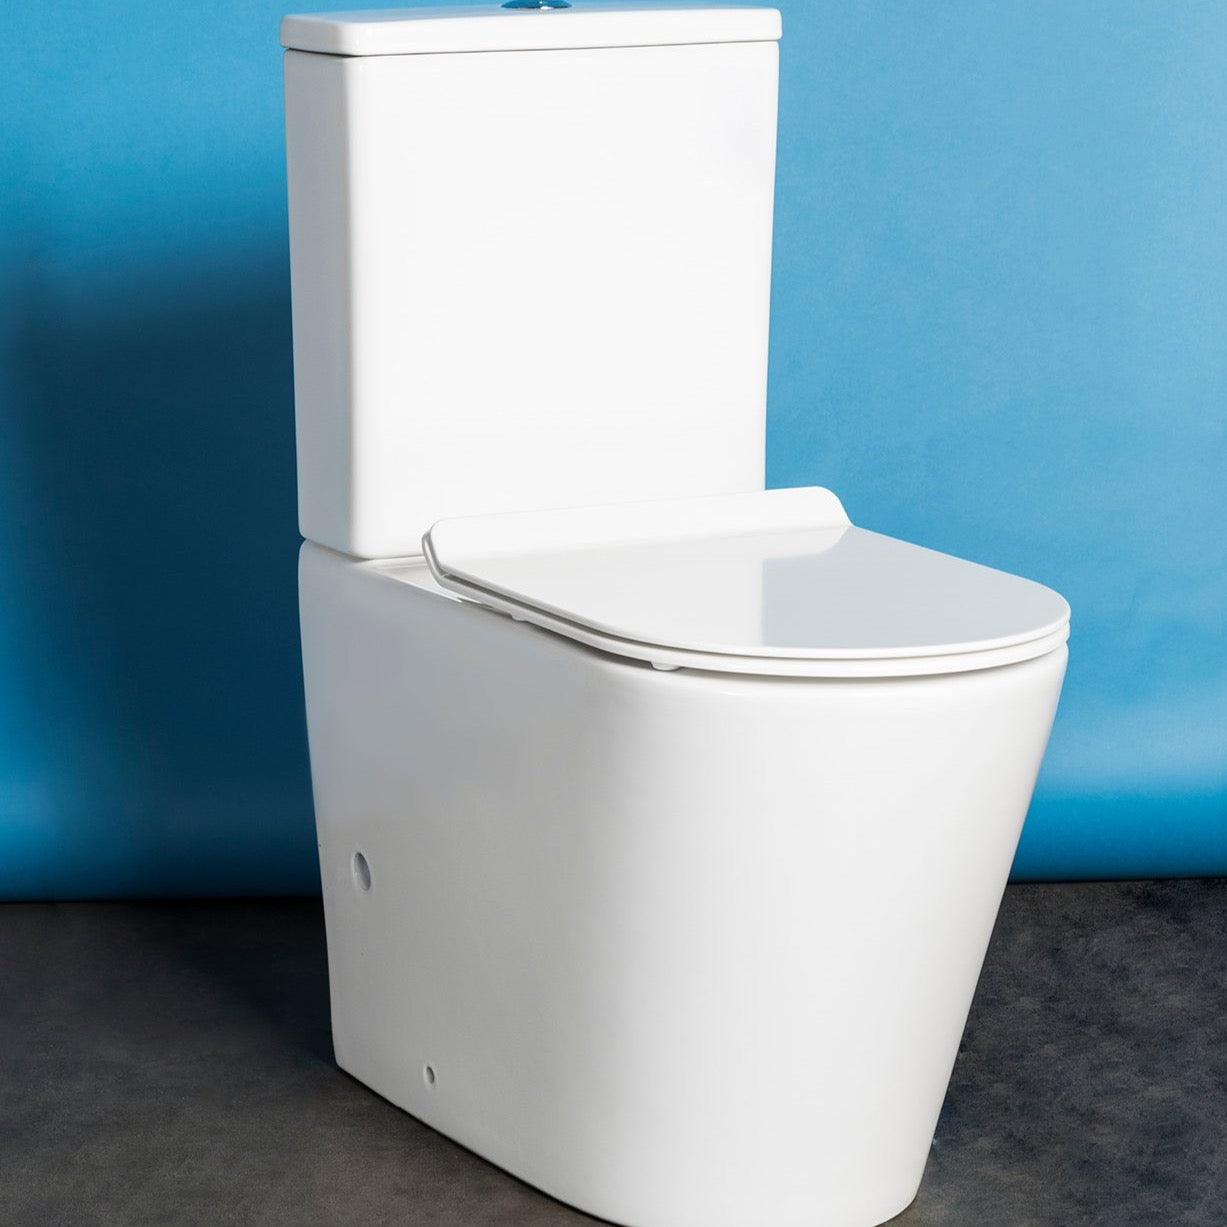 The Argyle Rimless Wall-Faced Two-Piece Toilet